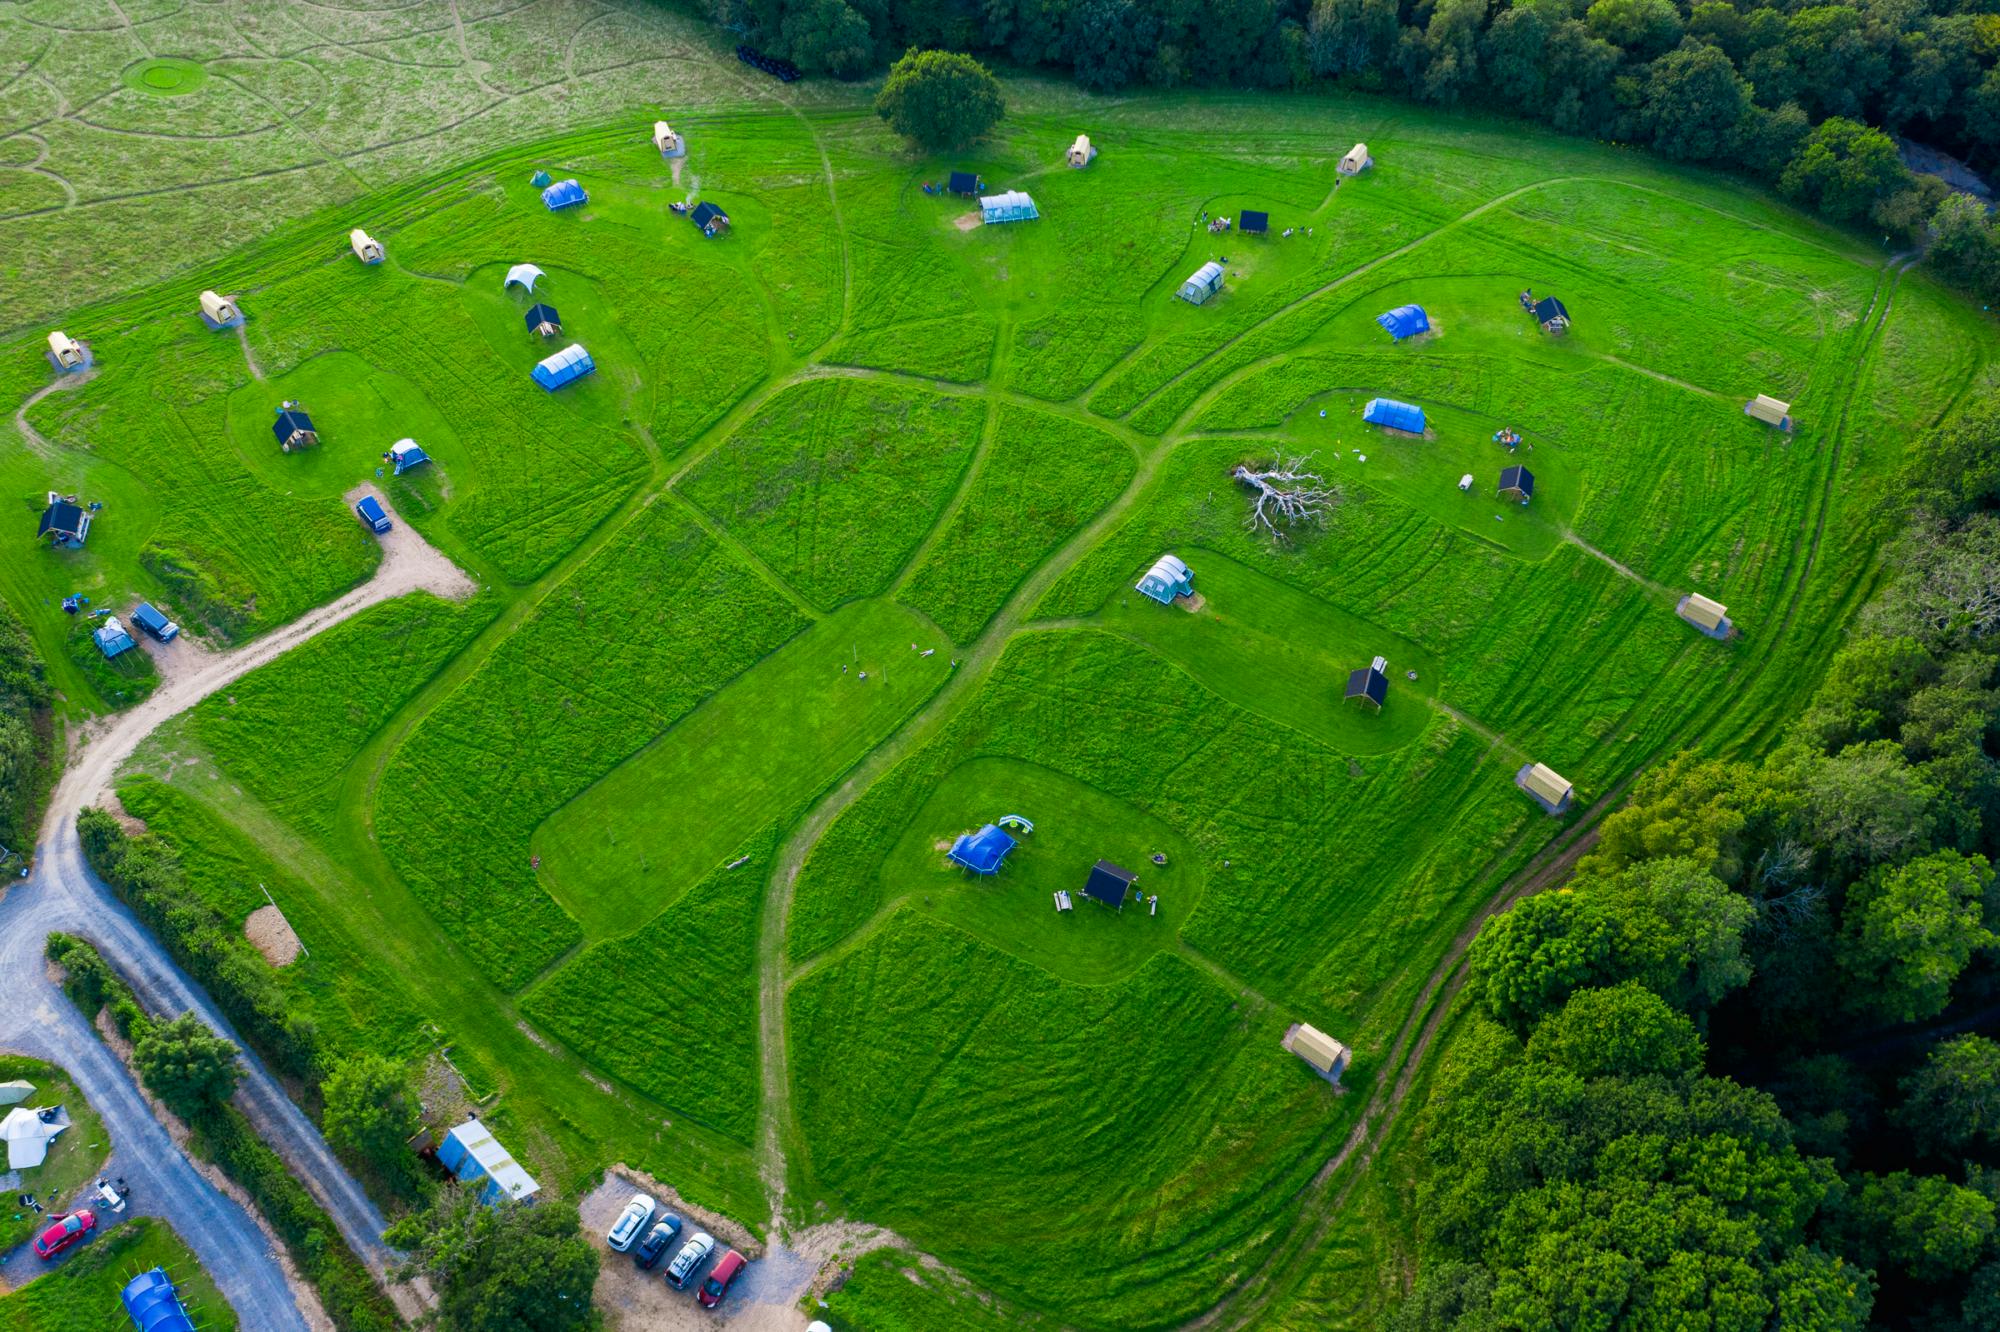 Cowpots Camping from the sky 2020 (with new undercover areas and ensuite toilet and shower pods!)